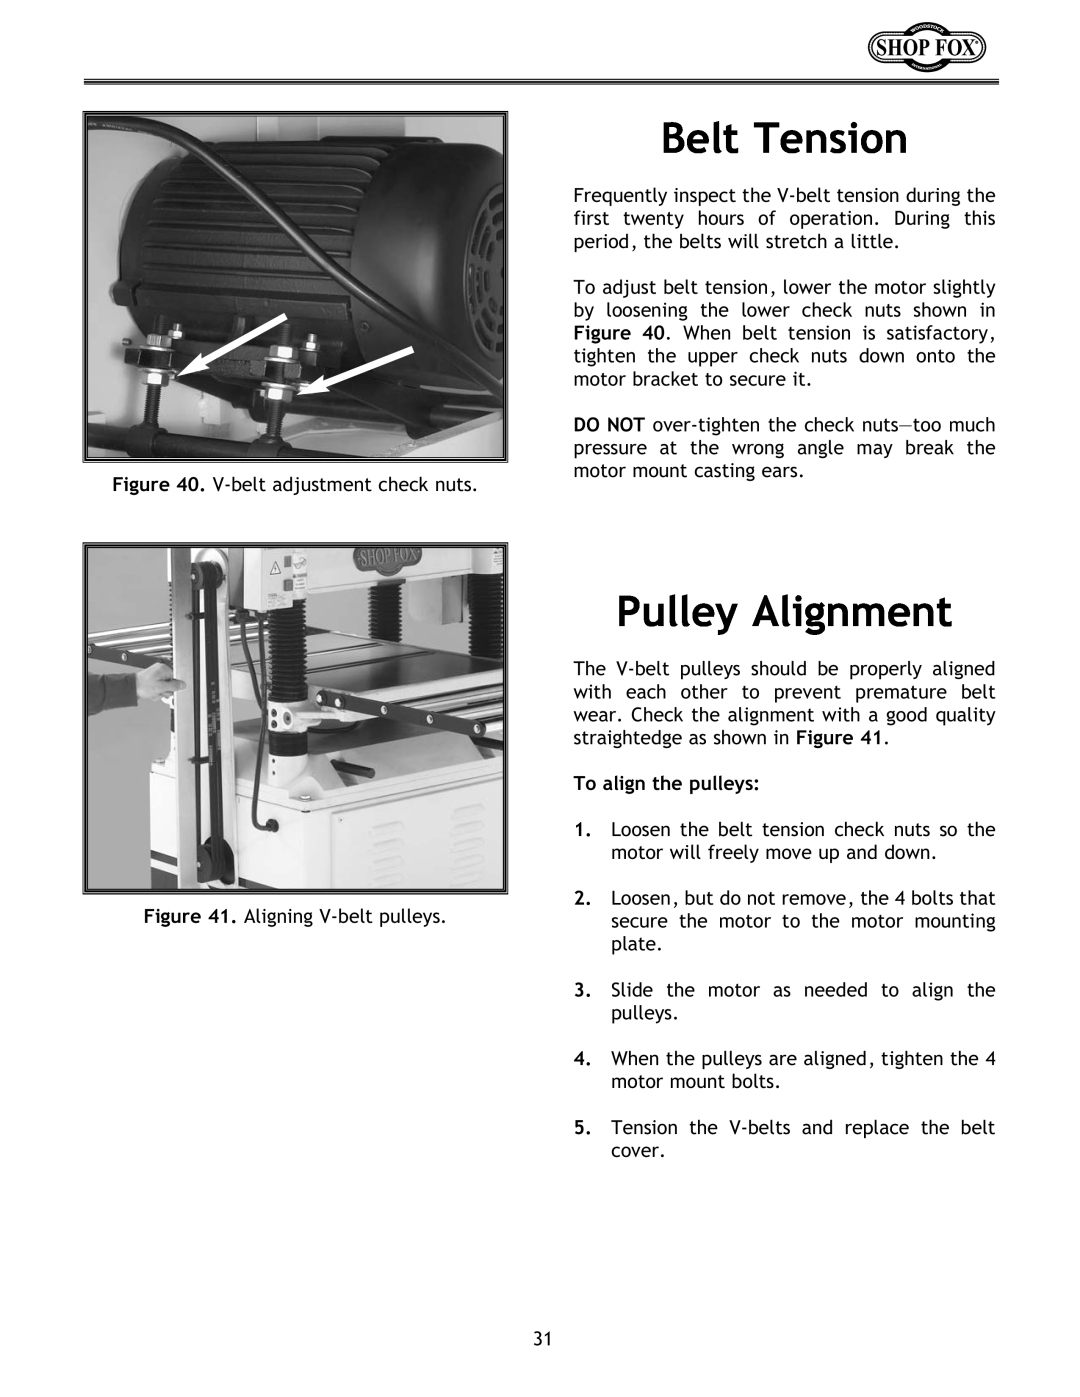 Woodstock W1683 instruction manual Belt Tension, Pulley Alignment, To align the pulleys 